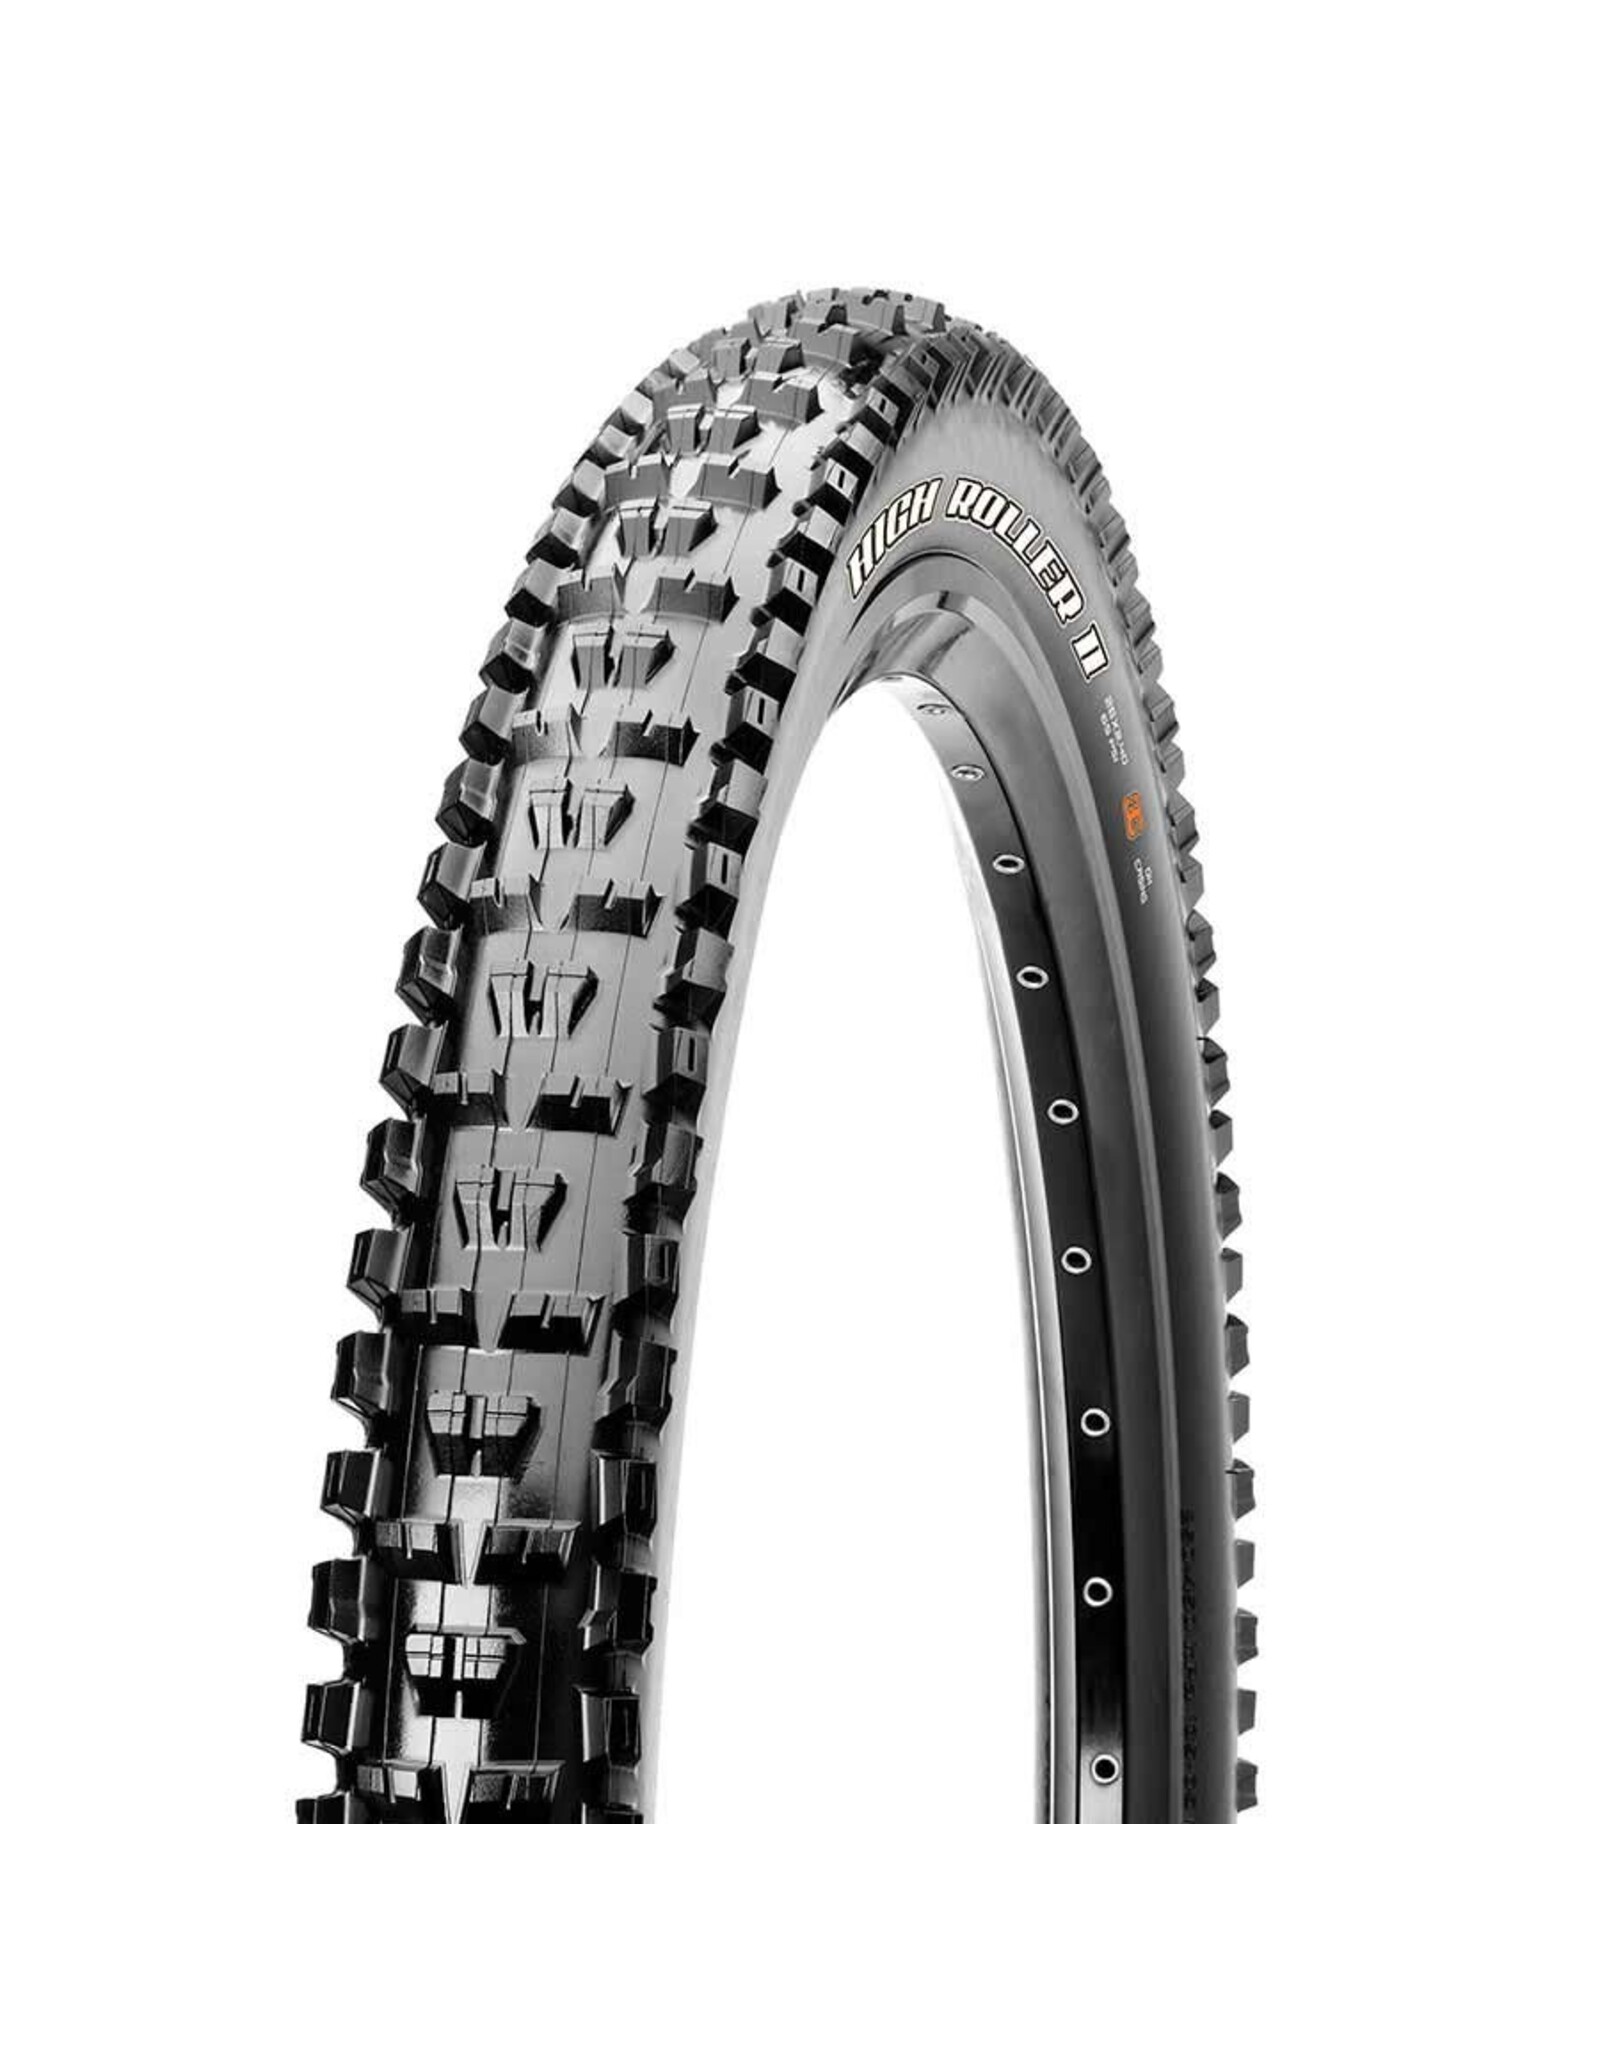 Maxxis Maxxis High Roller II 29" Tire